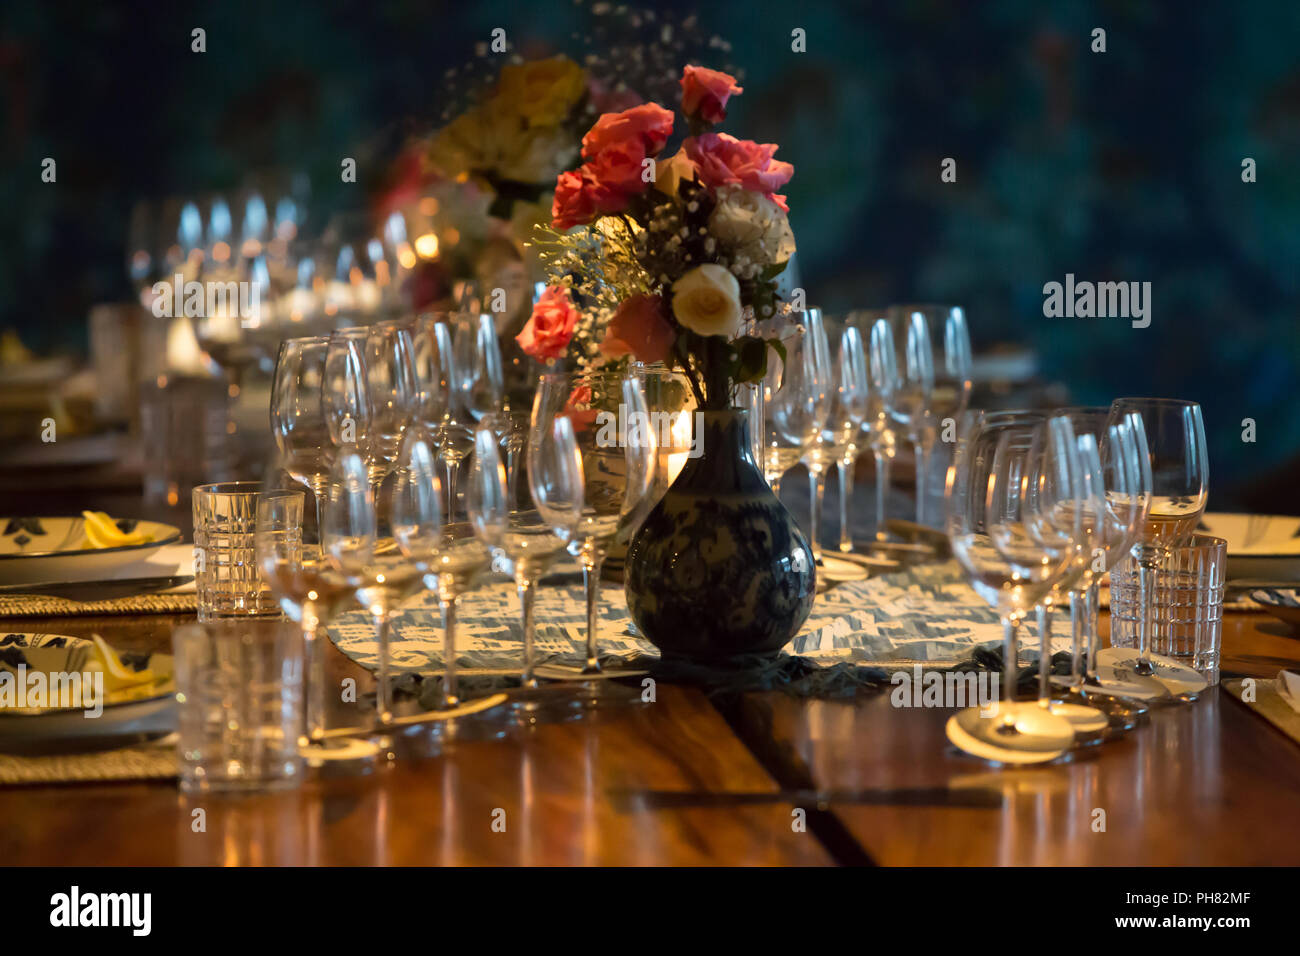 Glasses for champagne, wine, stand on a table. Wedding party, dinner or special event set up. Stock Photo